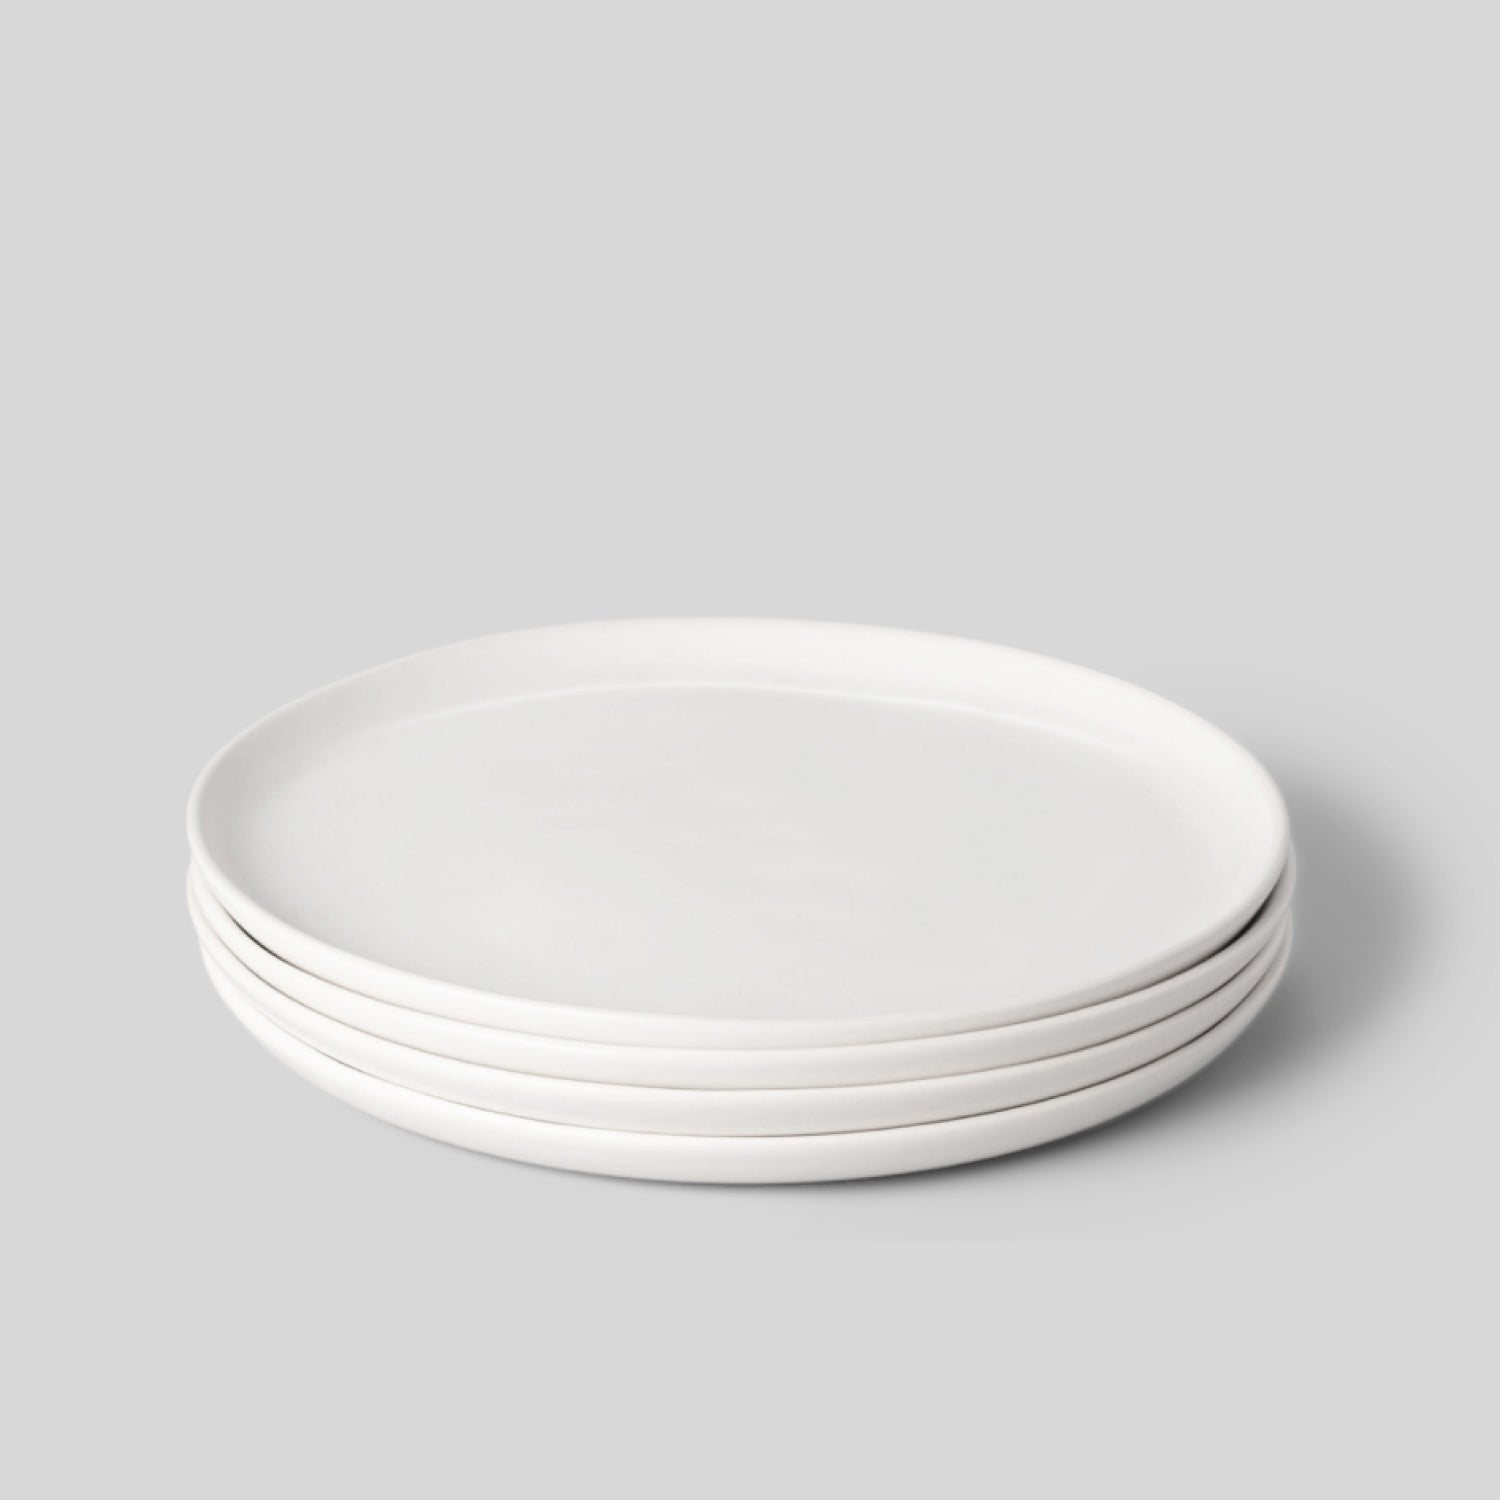 The Dinner Plates, Ceramic Plates With Different Colors